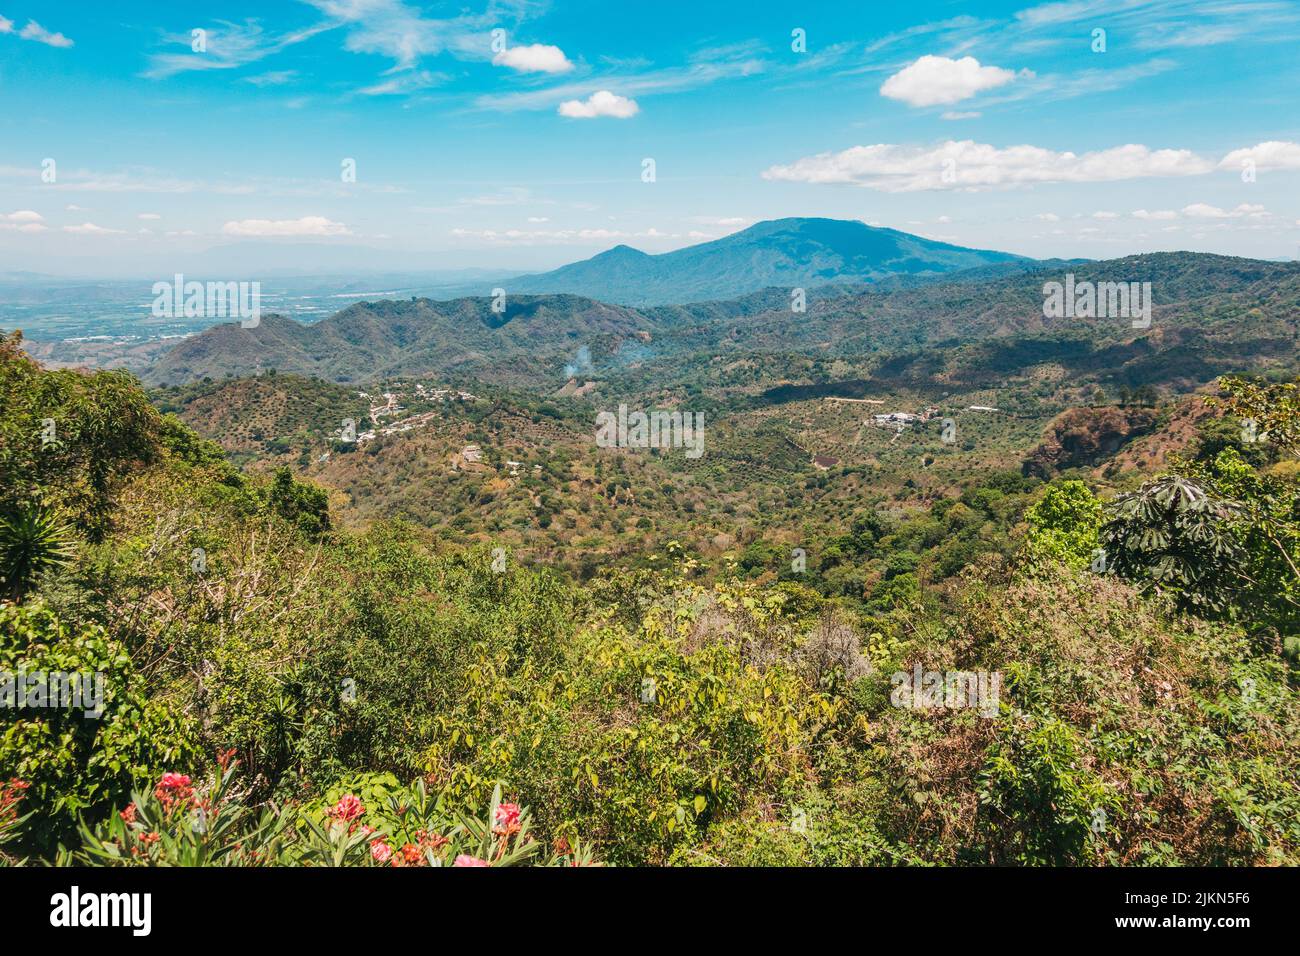 Looking at the small rural town of Talnique, nestled in the mountains inland El Salvador Stock Photo